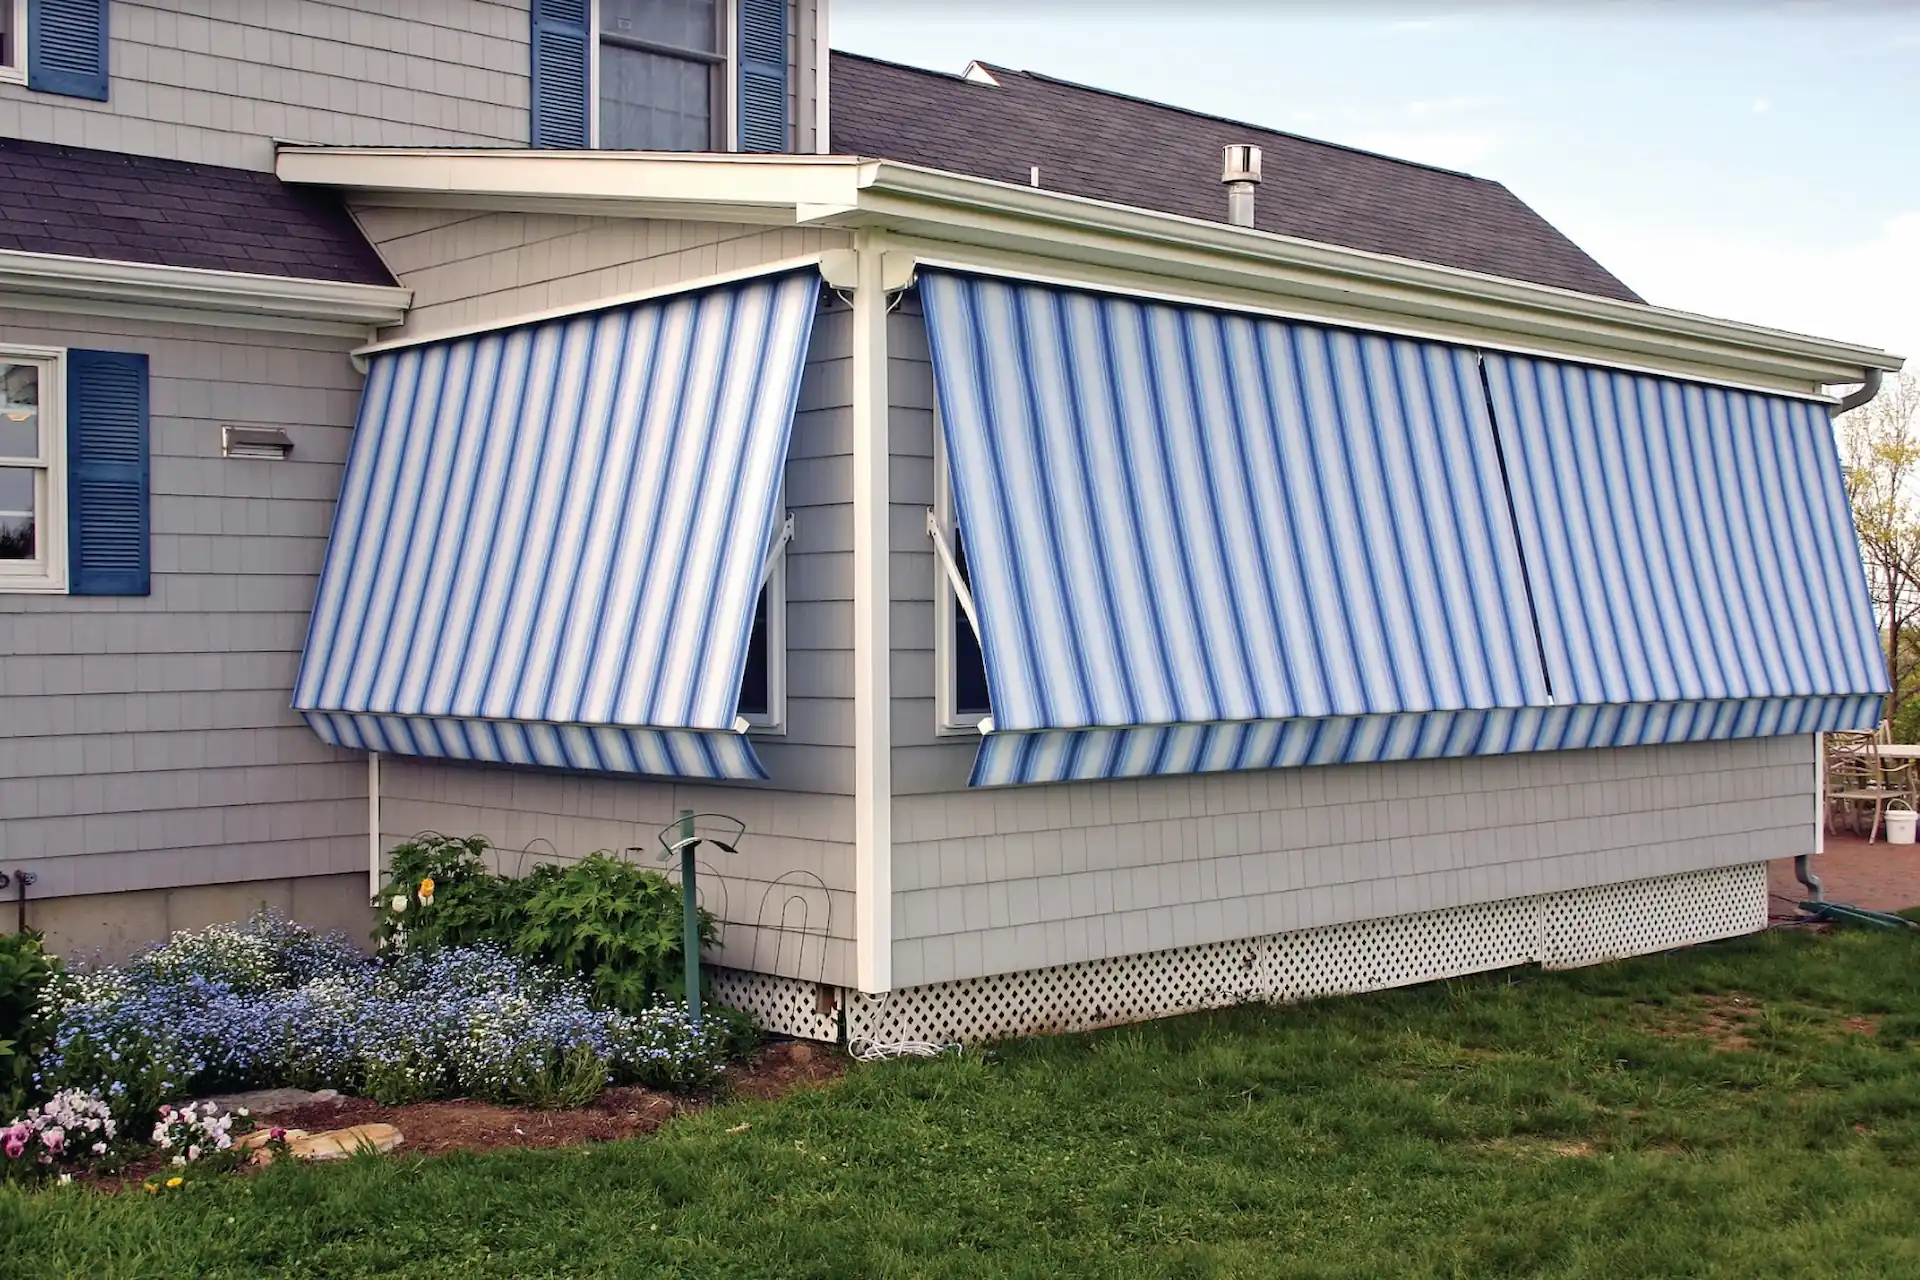 Exterior shot of a set of blue and white-striped window awnings are pulled down over the windows of a sunroom. When it comes to how to clean your awning, you should always wash and dry it in its fully extended position.